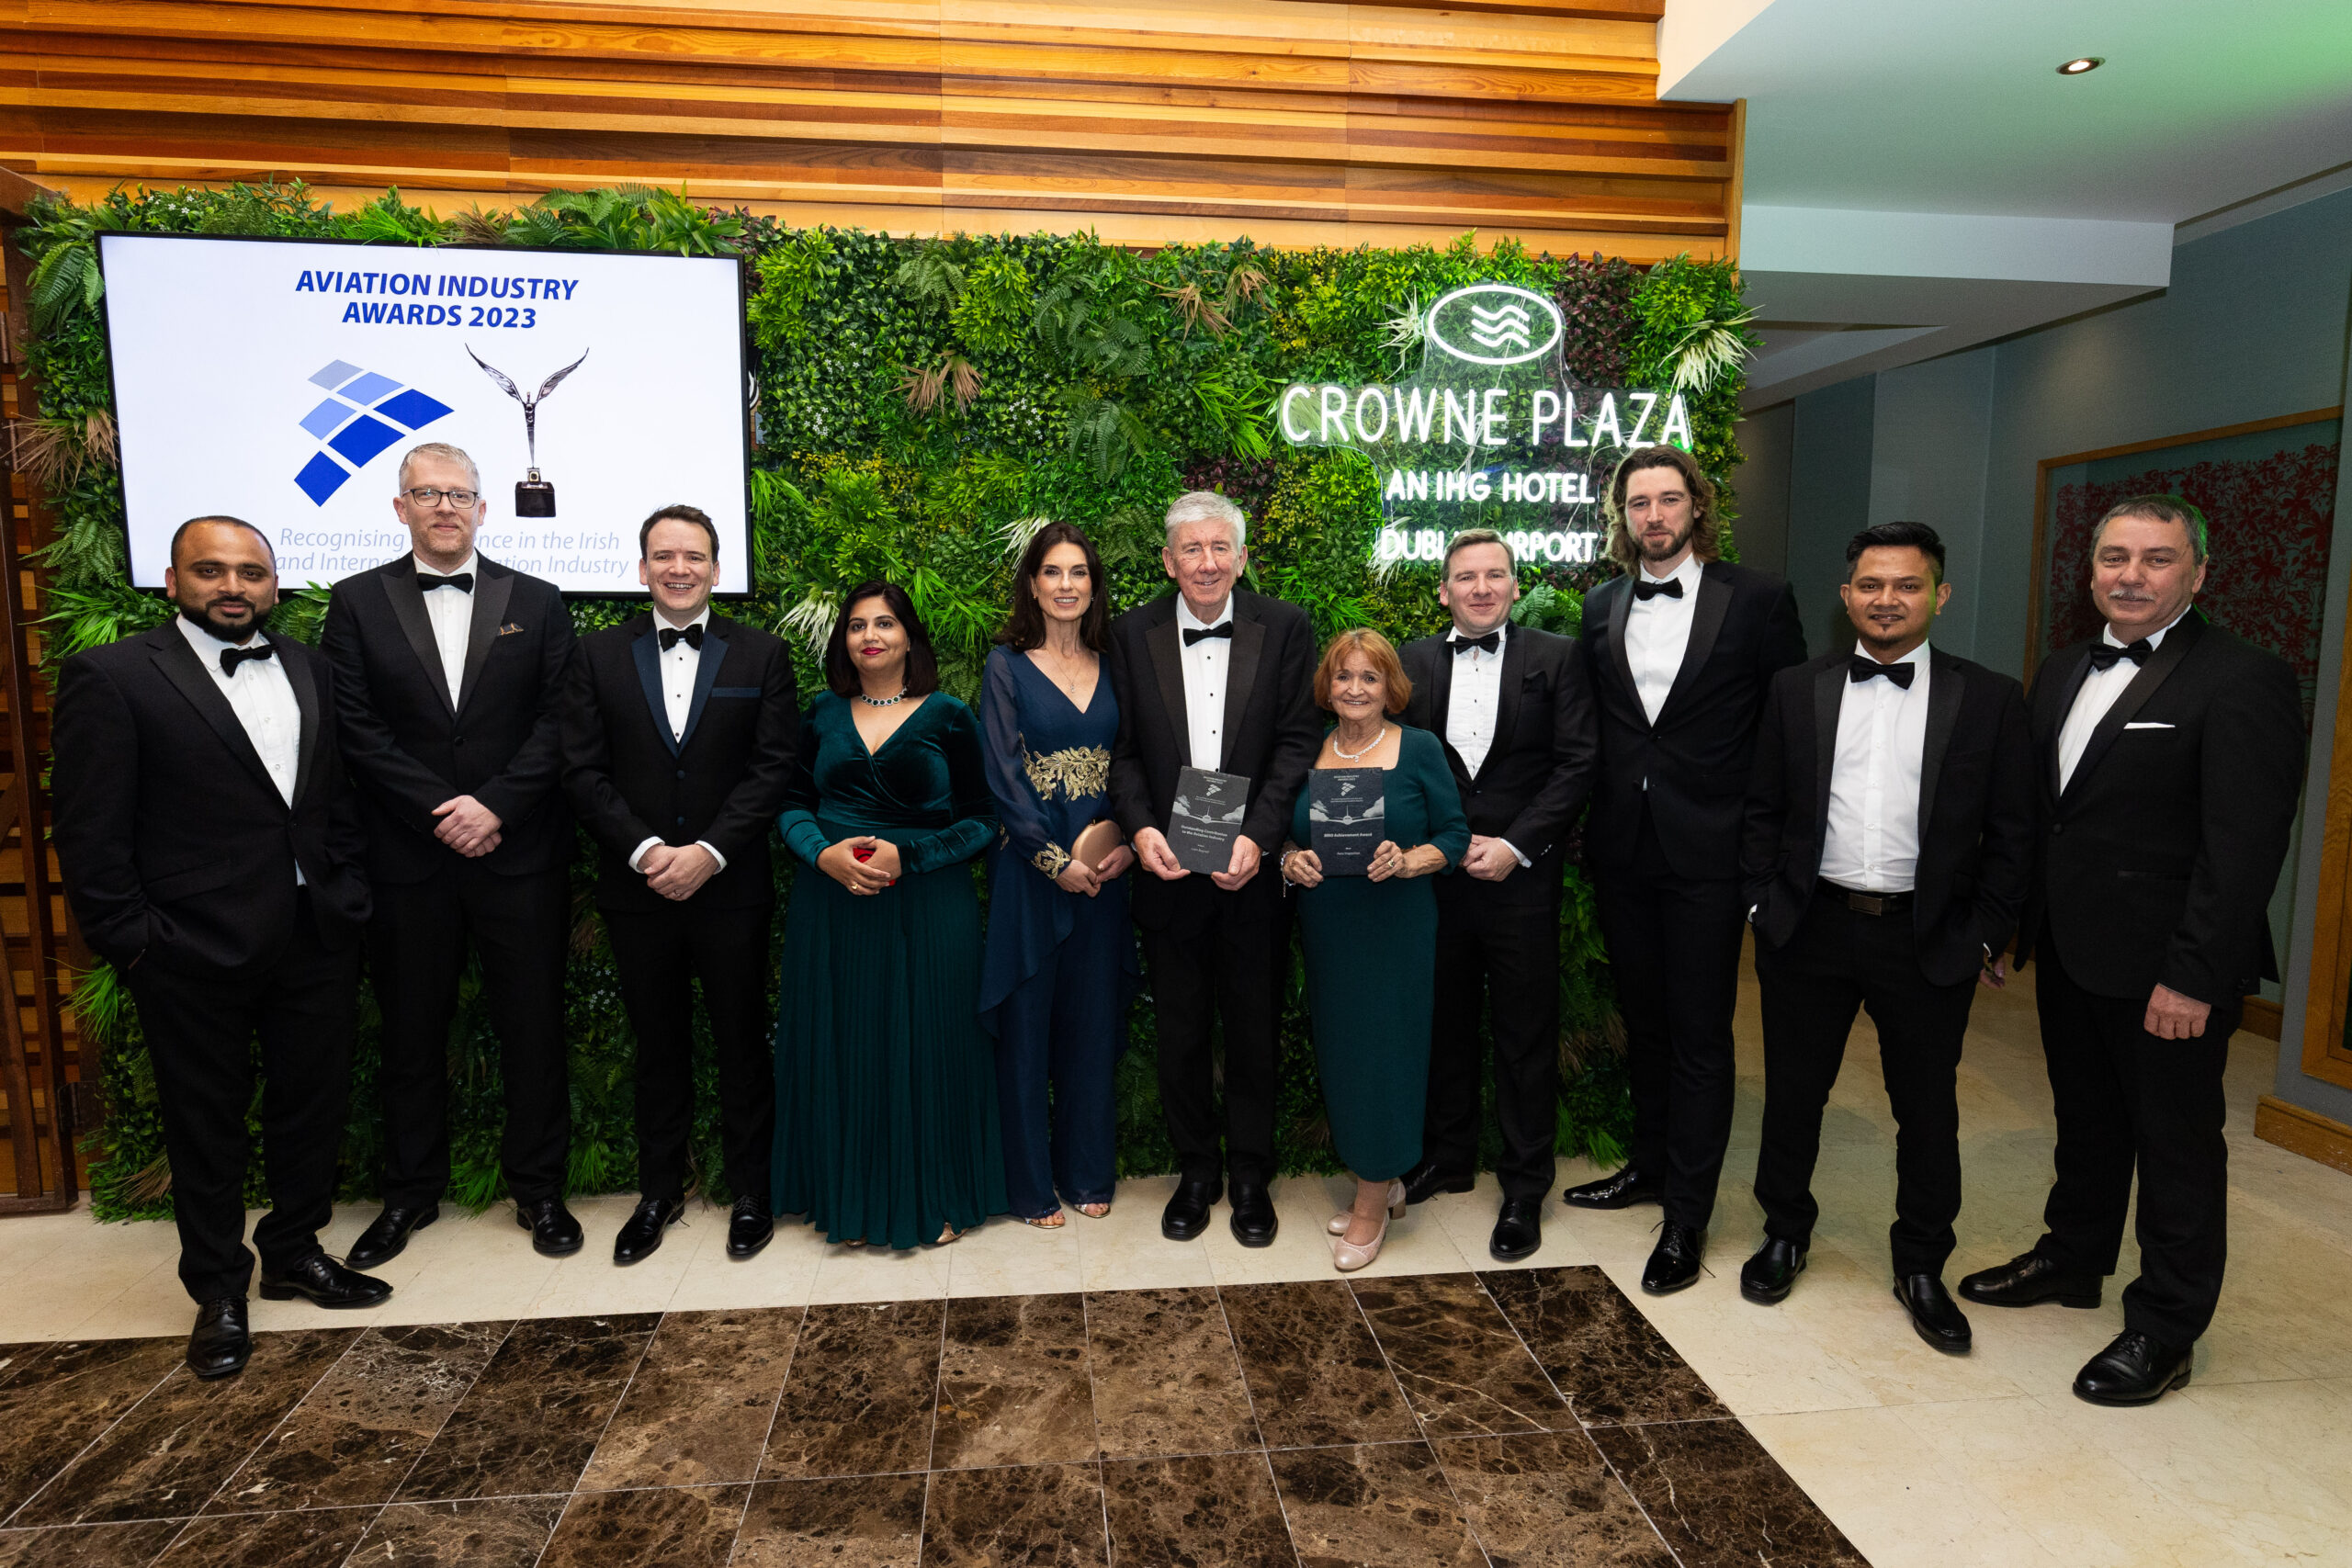 Pictured at the Aviation Industry Awards 2023 at the
Crowne Plaza Hotel, Santry, Dublin 9, 30th November 2023.